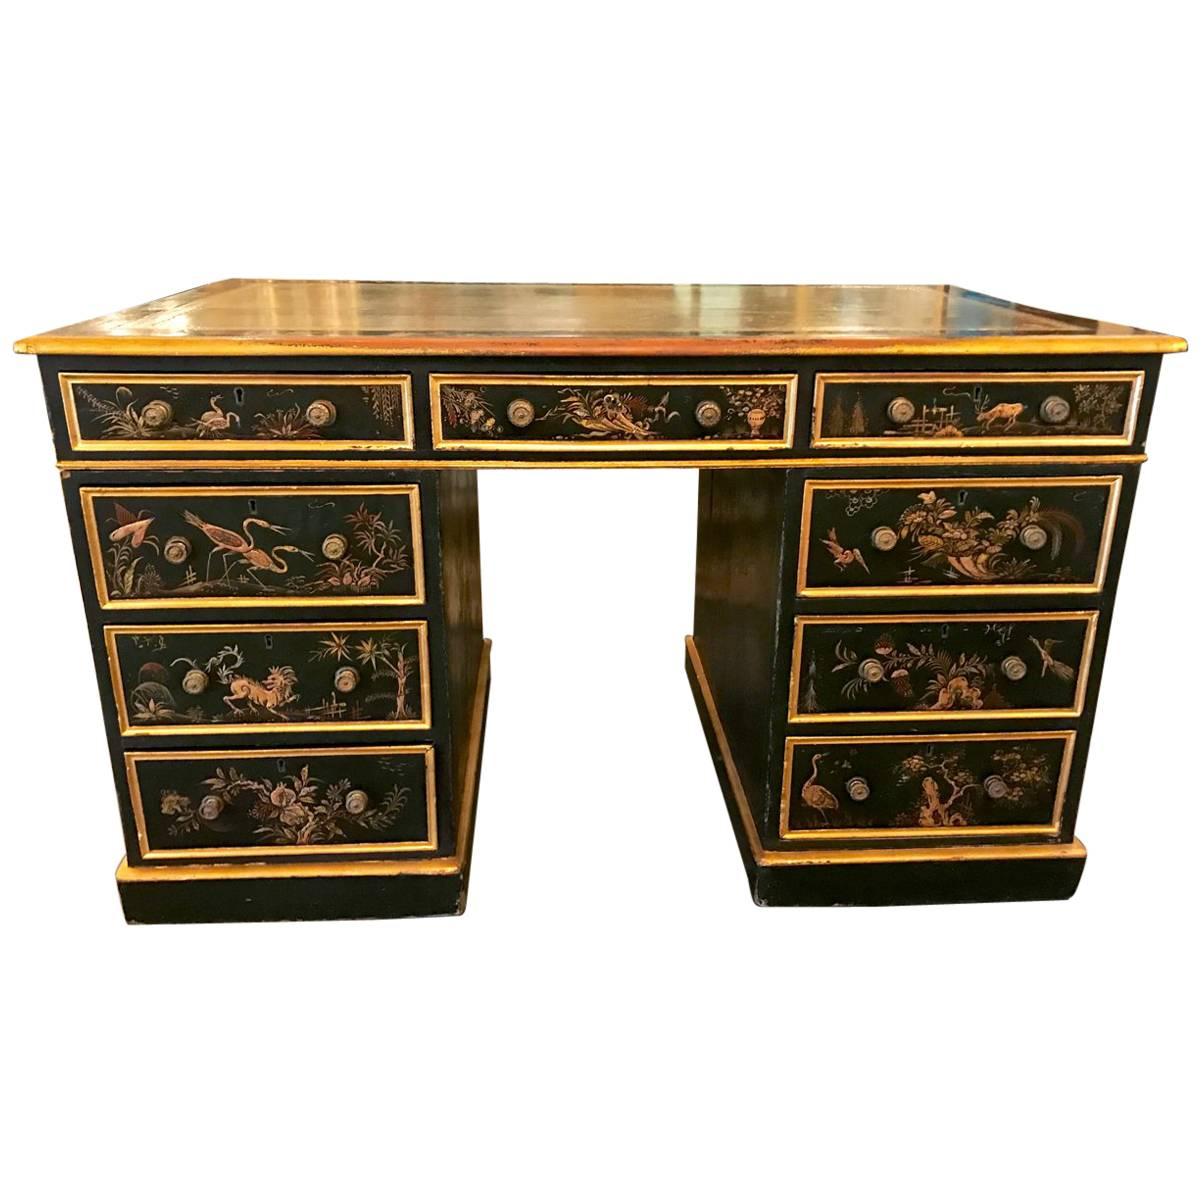 Exceptional Double Pedestal Chinoiserie/Japanned Desk, 19th Century